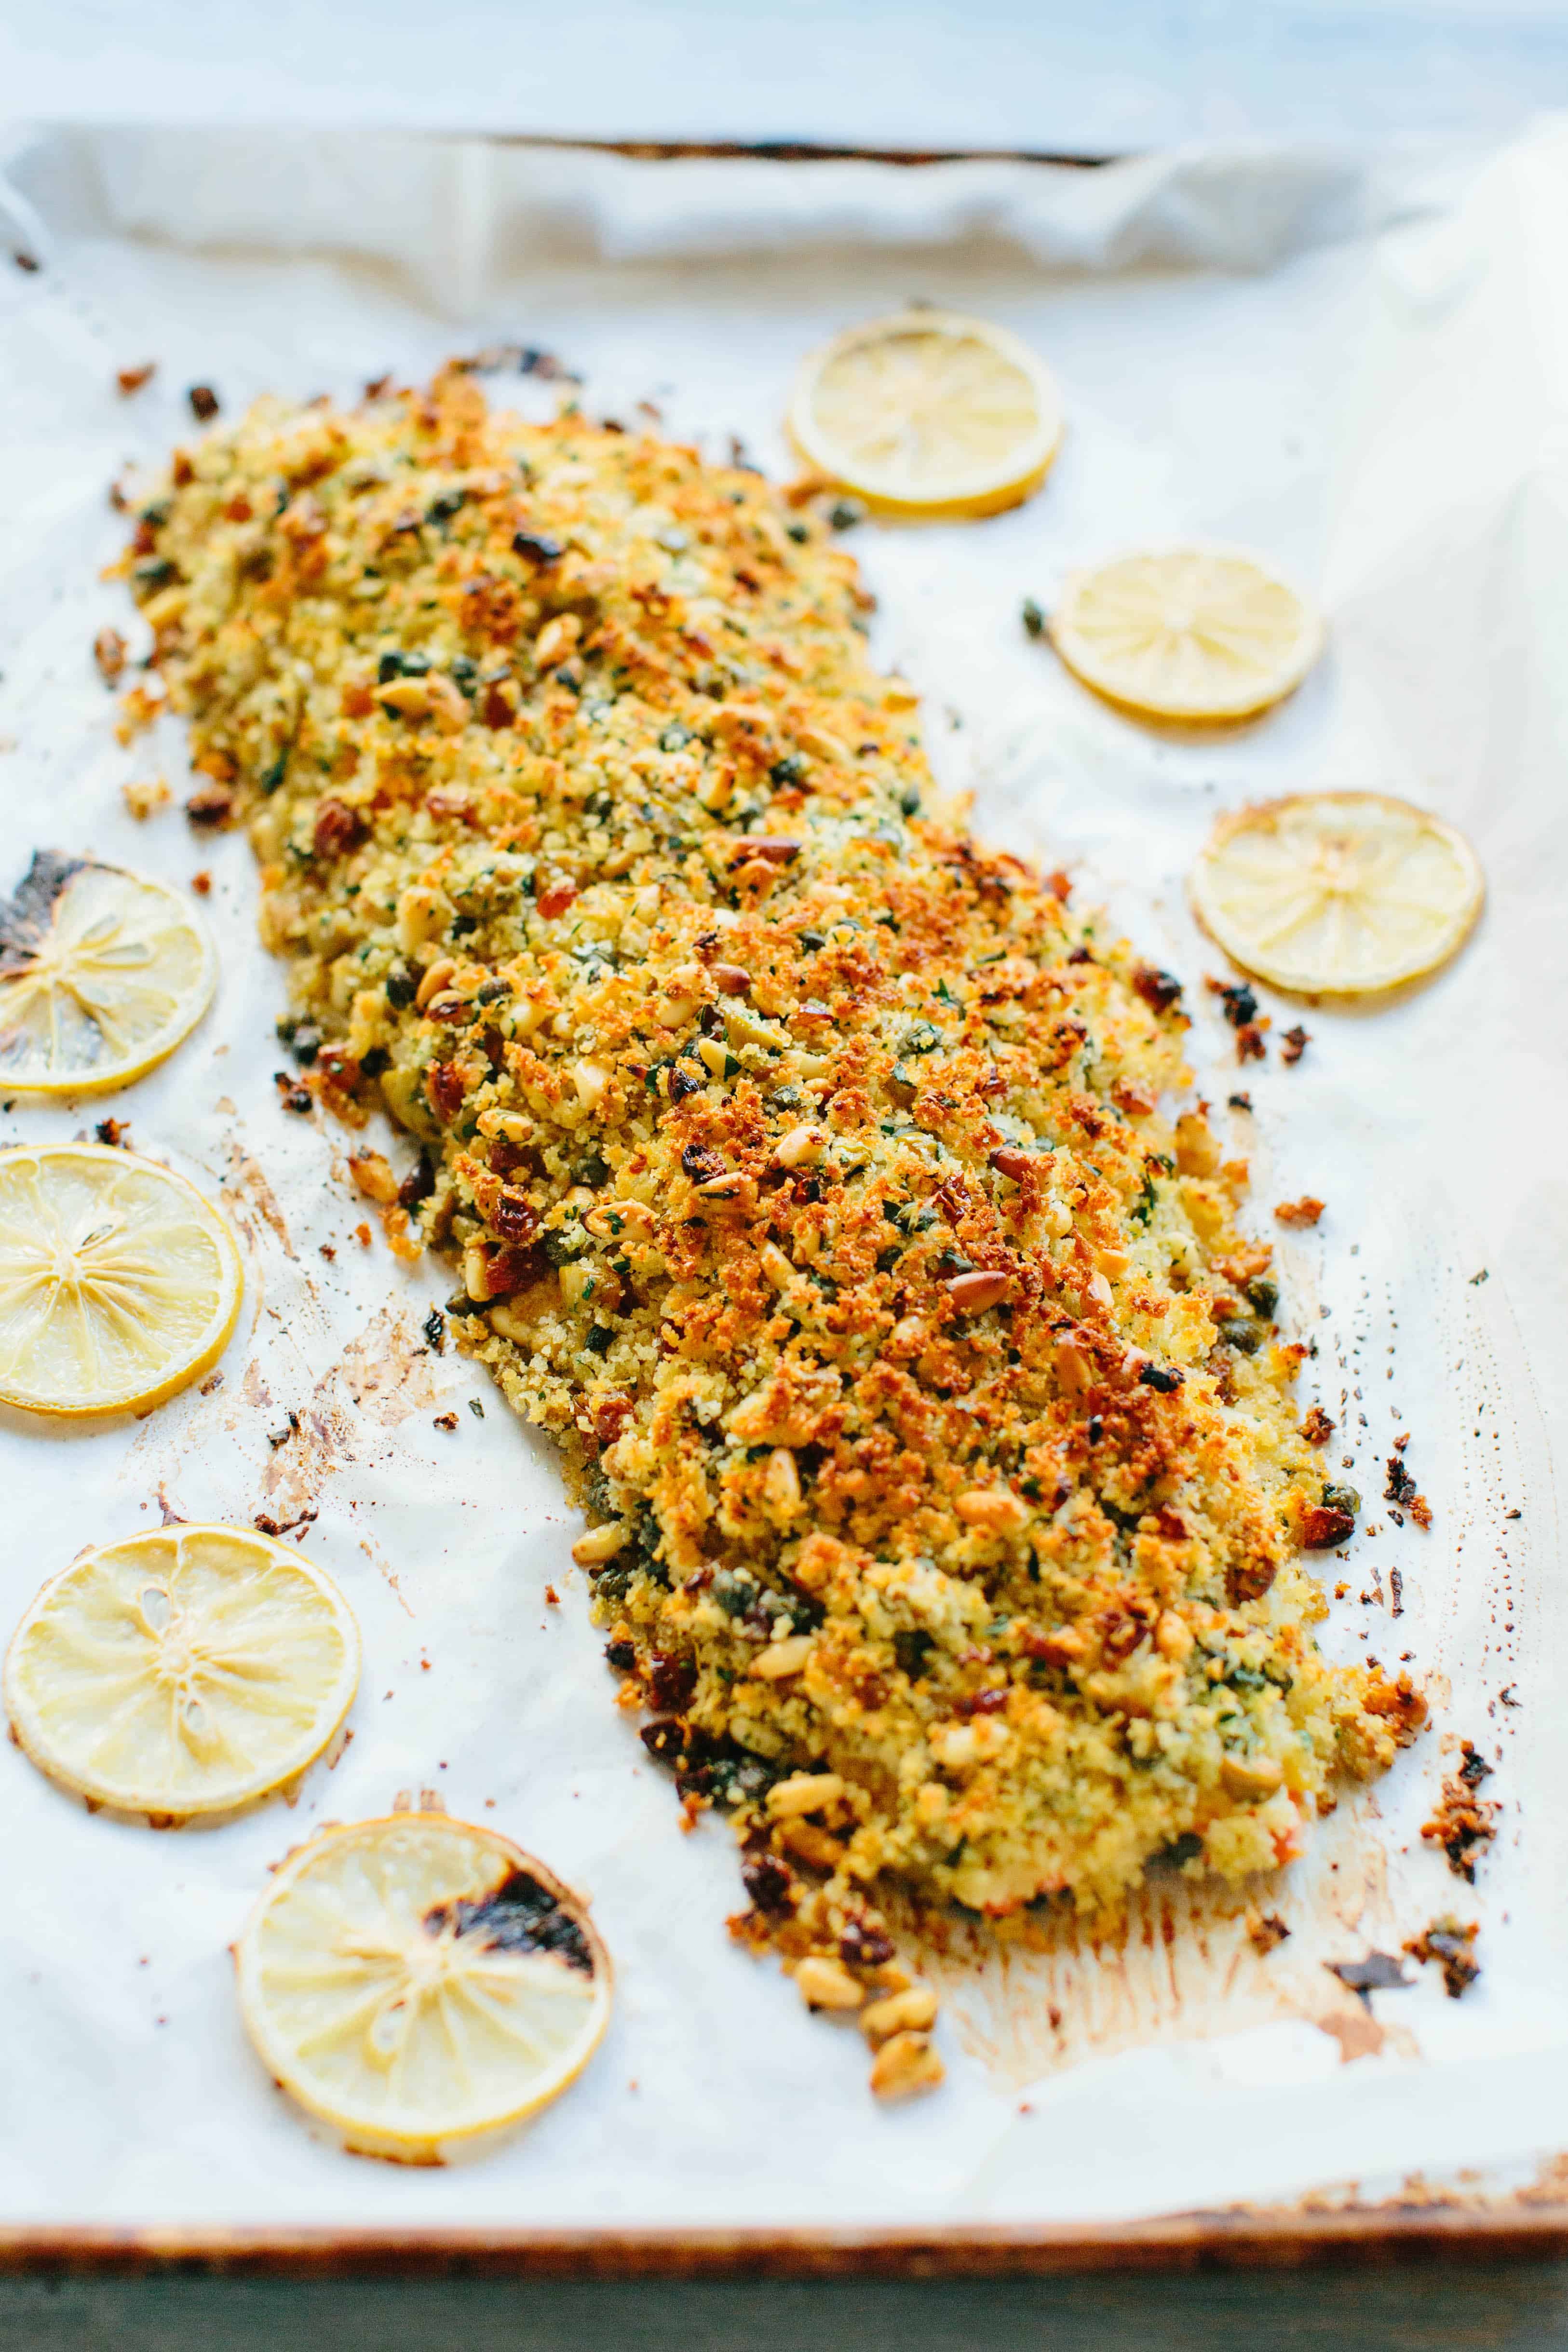 A whole fillet of roasted salmon with breadcrumbs and lemon on a sheet pan